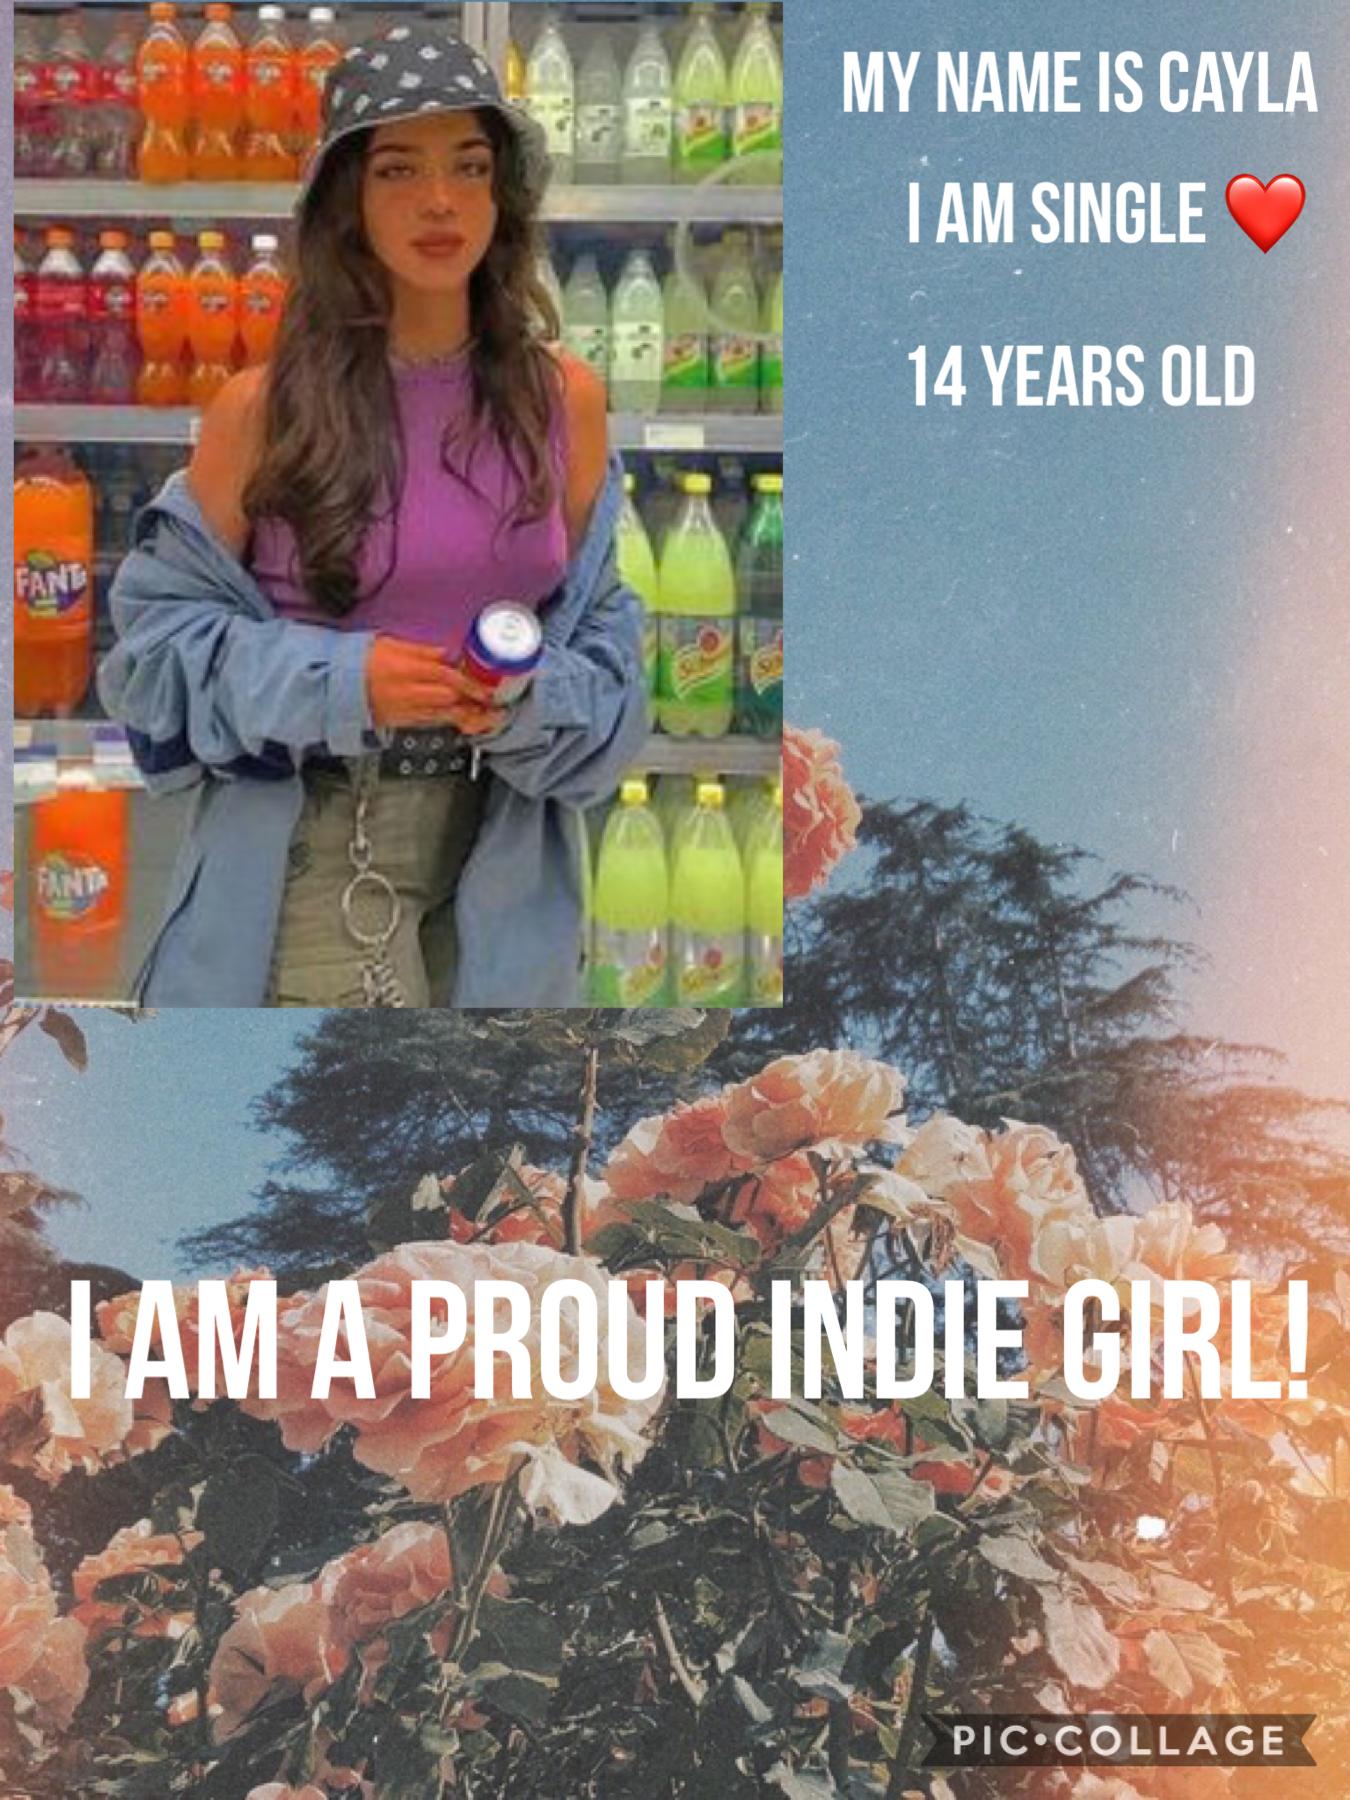 Comment if your an indie girl!